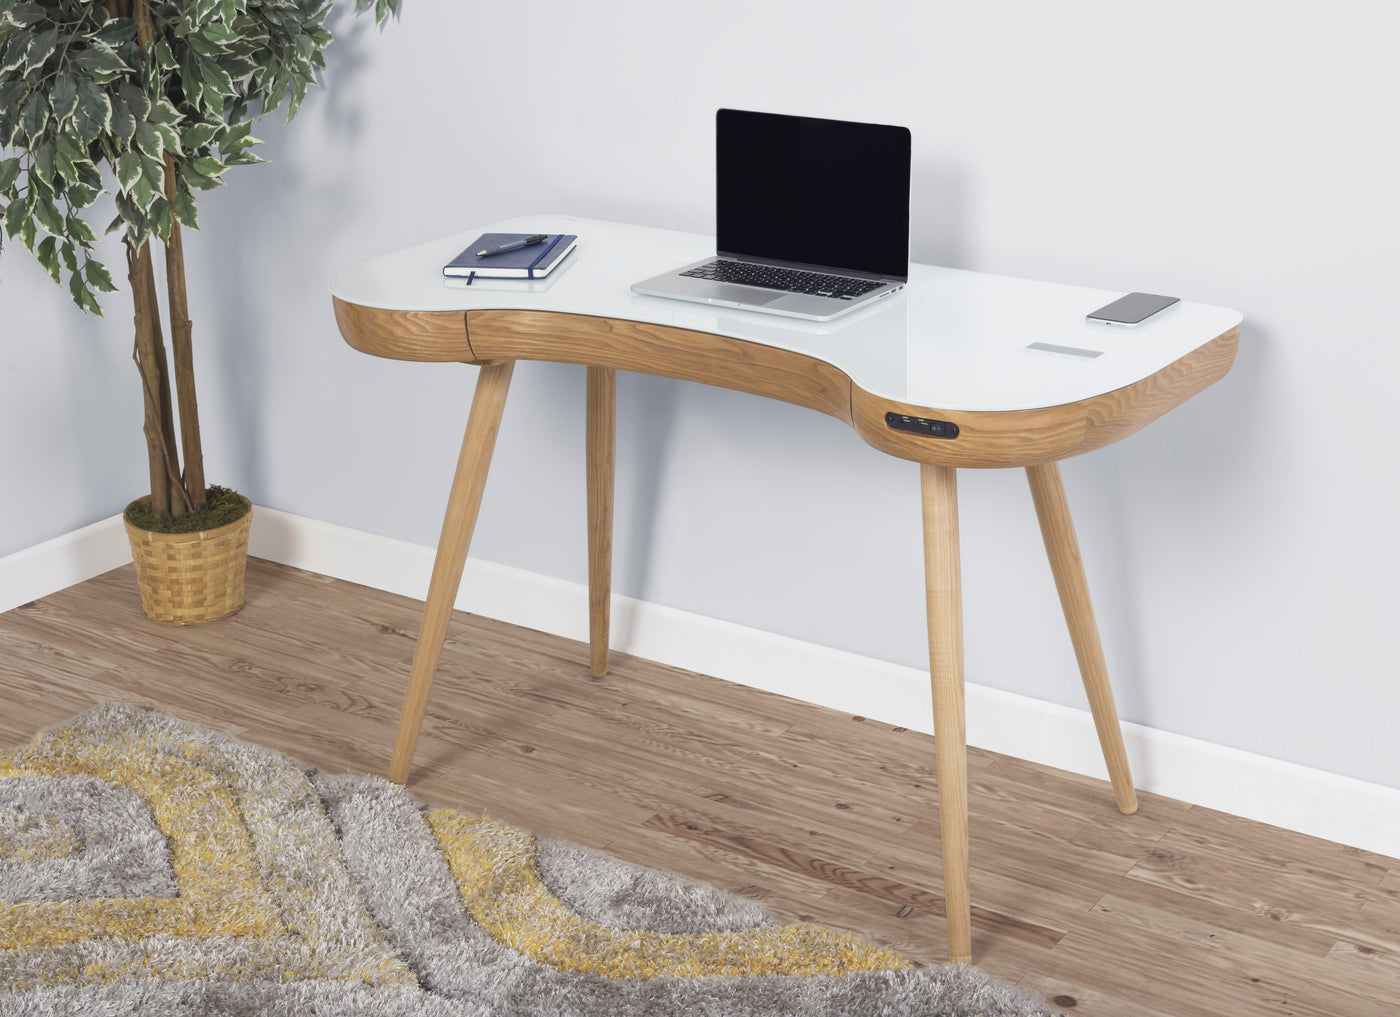 Jual San Francisco Smart Desk With Speakers And Wireless Charging